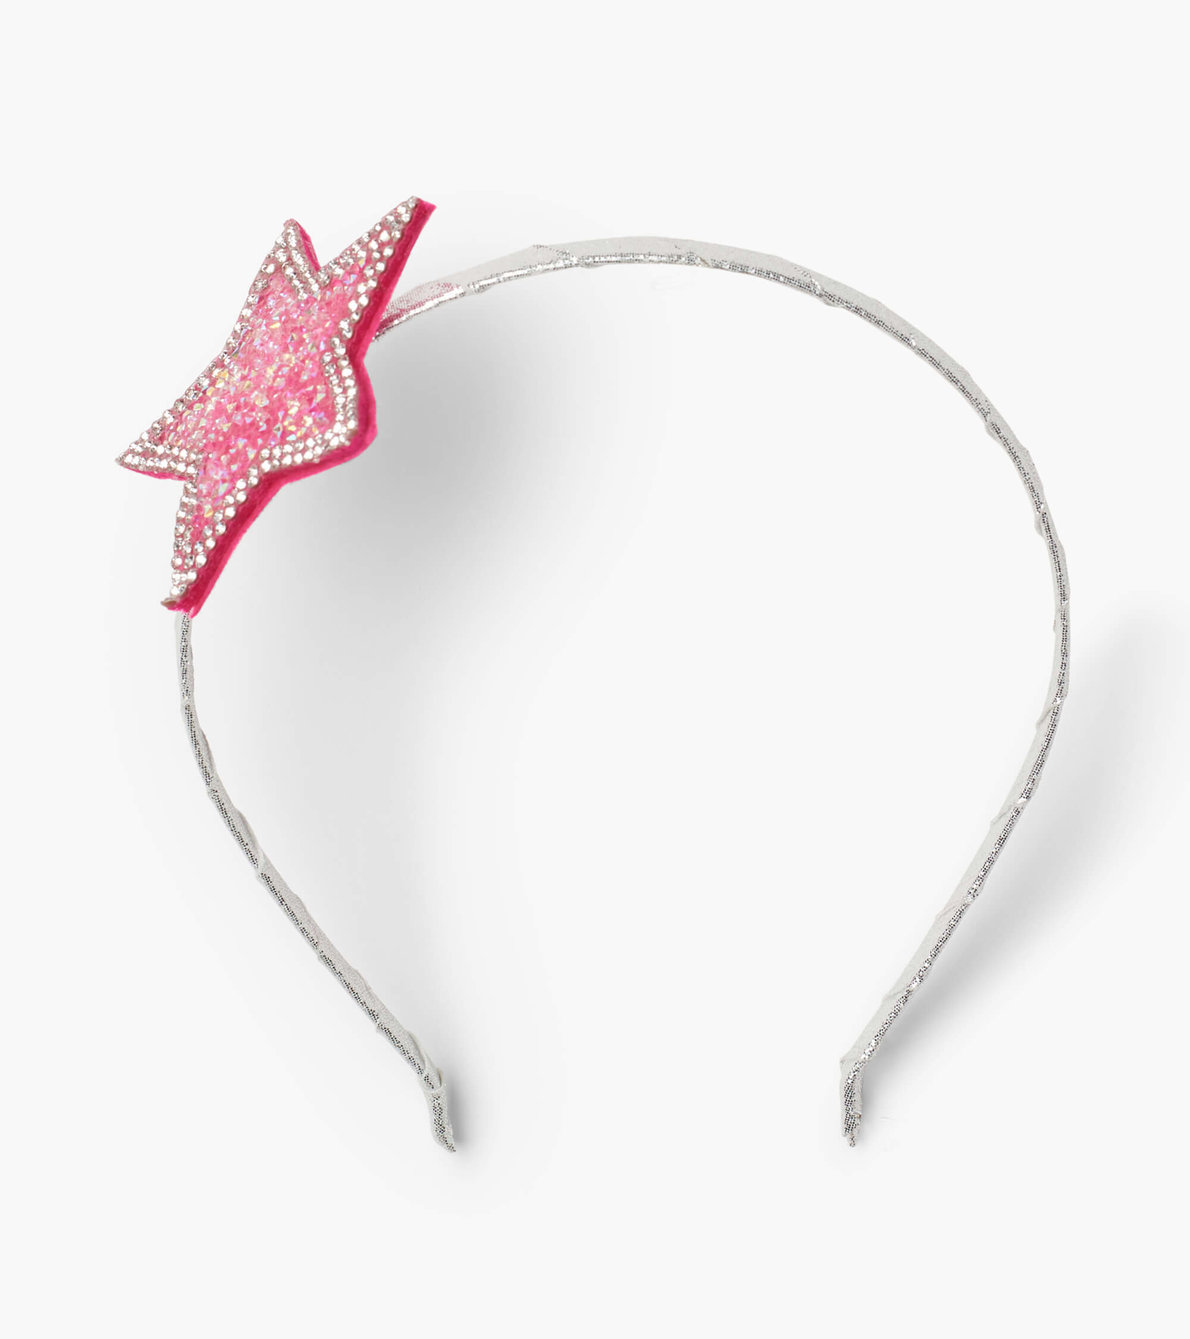 View larger image of Bling Star Headband